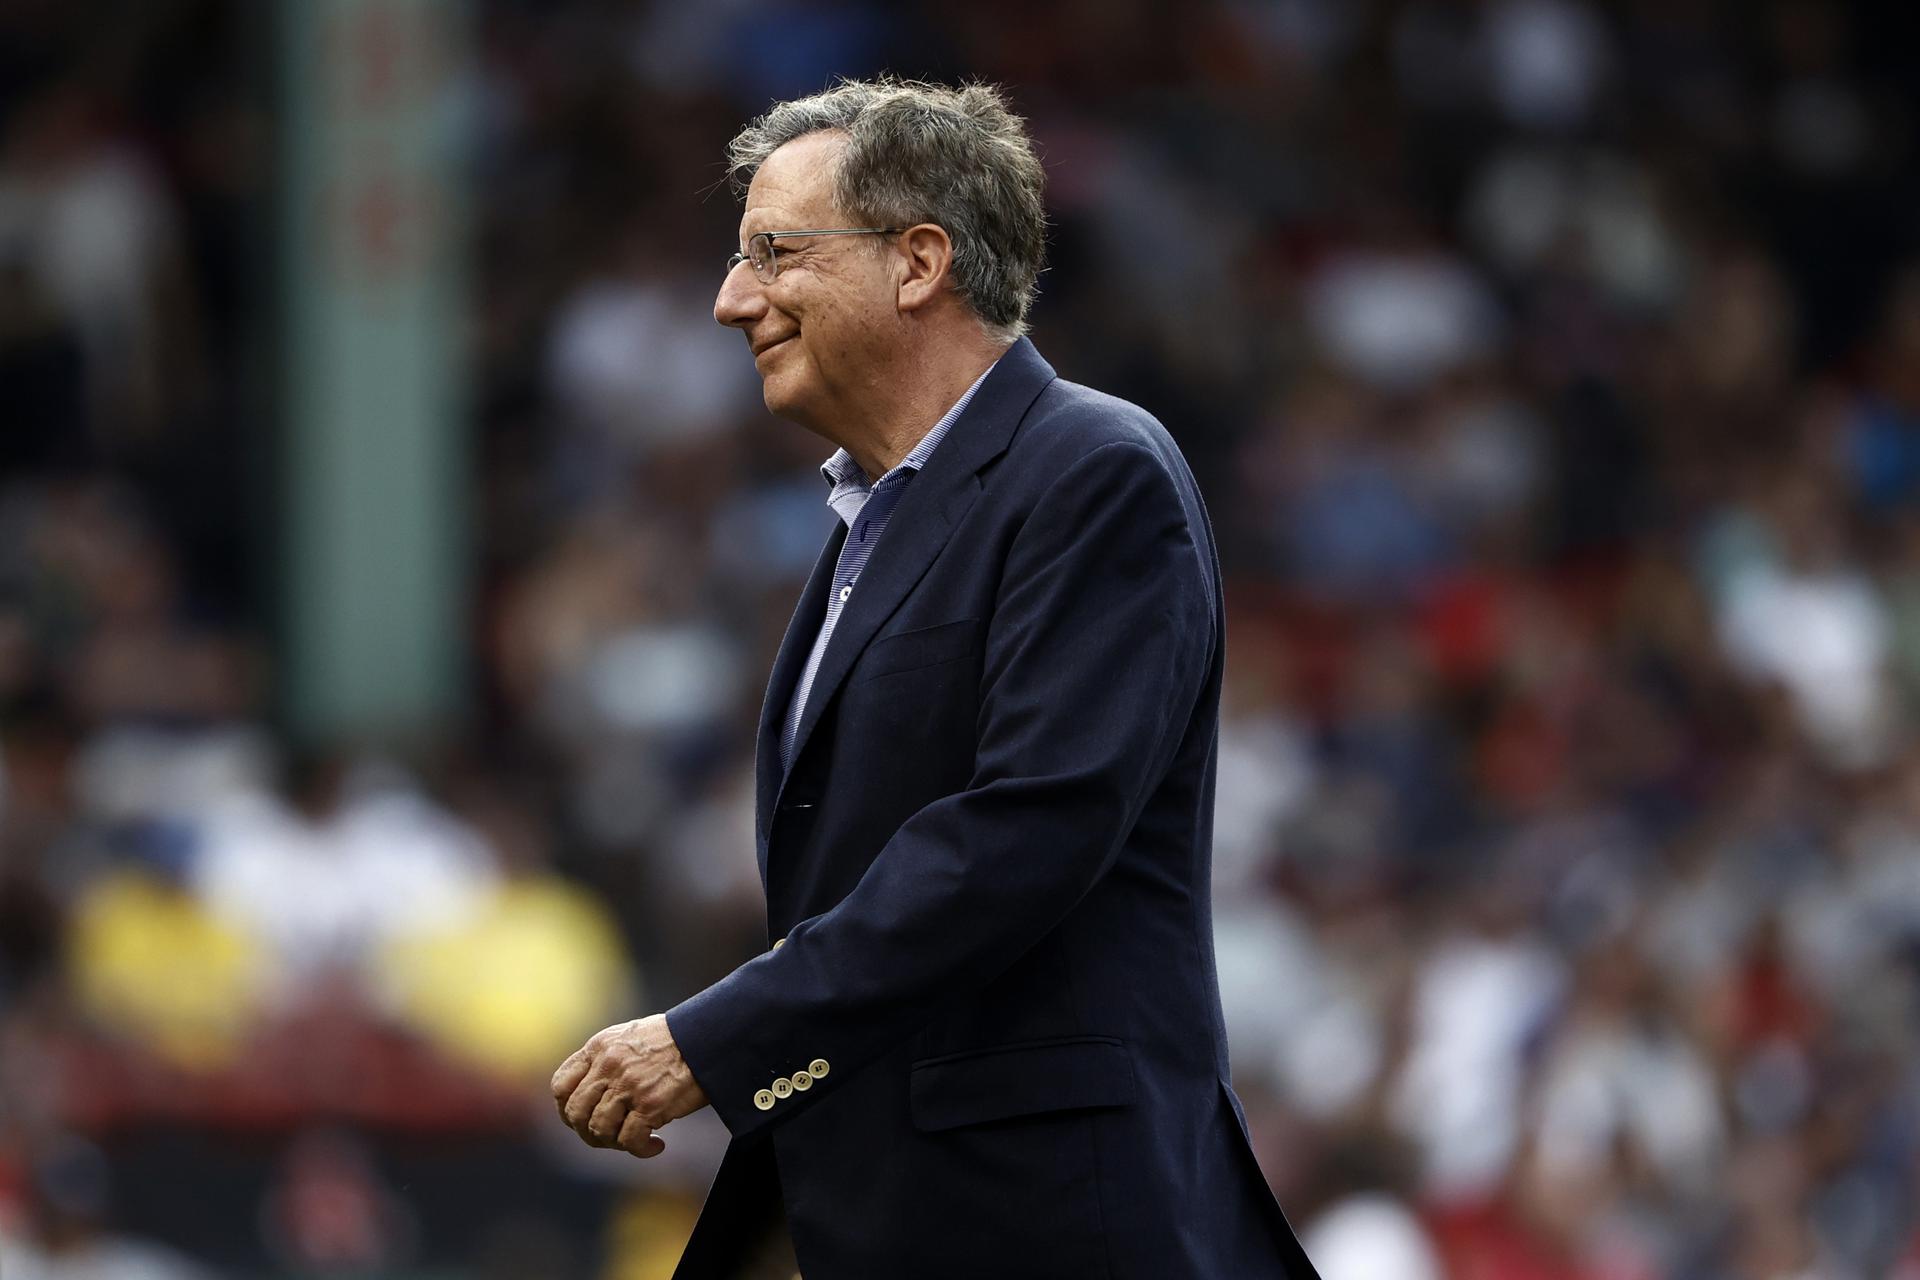 Red Sox chairman Tom Werner smiles as he walks across the field at Fenway Park